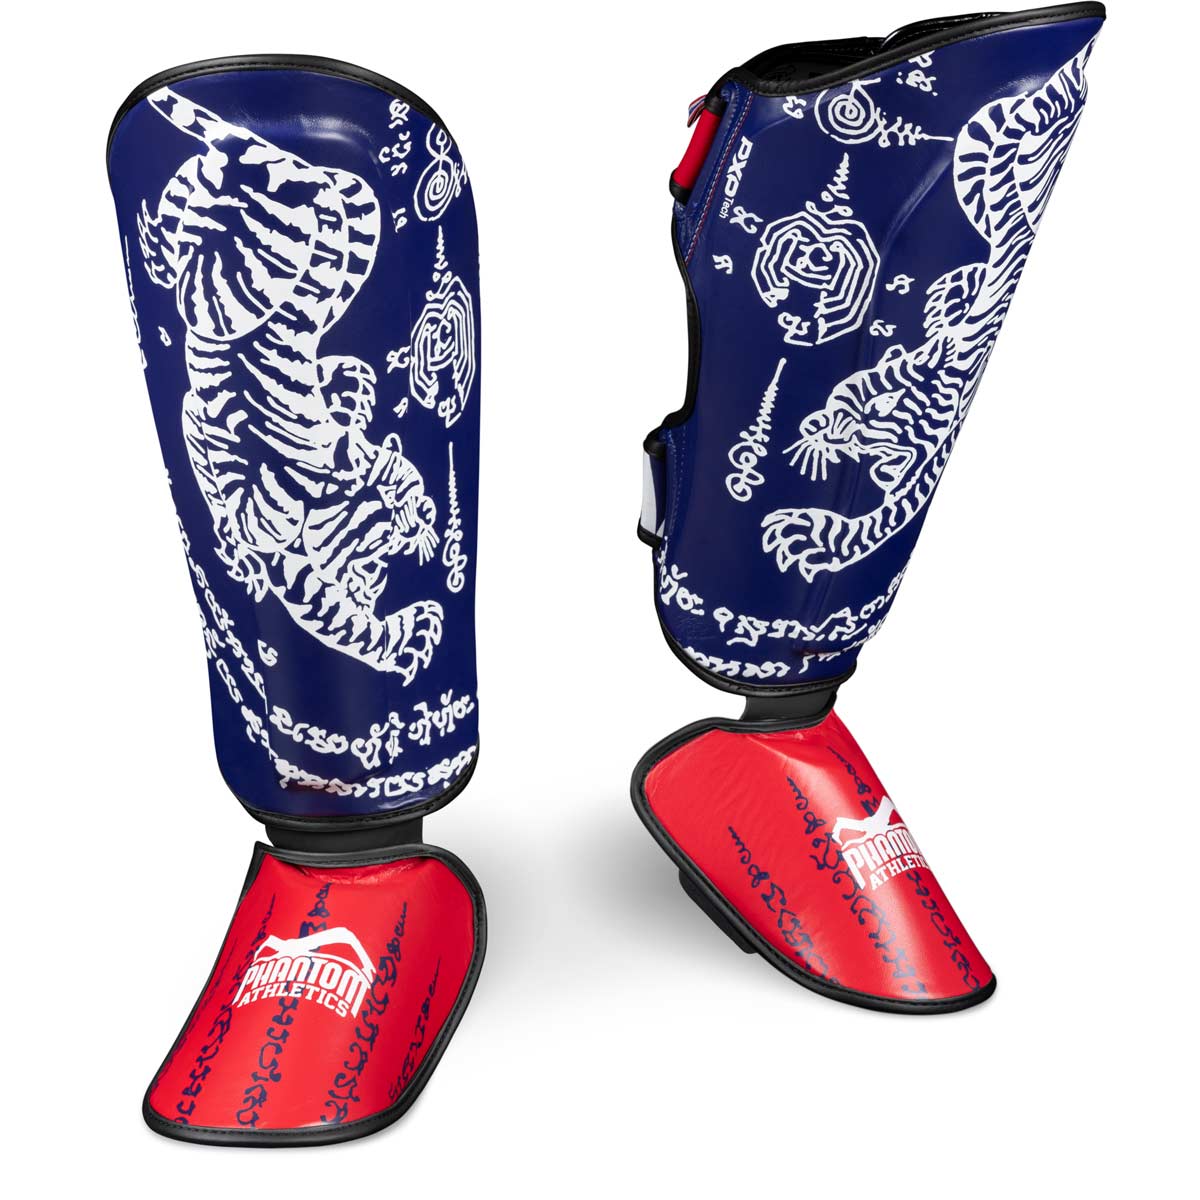 Phantom Muay Thai shin guard for Thai boxing and MMA sparring, competition and training. In the traditional Sak Yant design and the color blue/red.